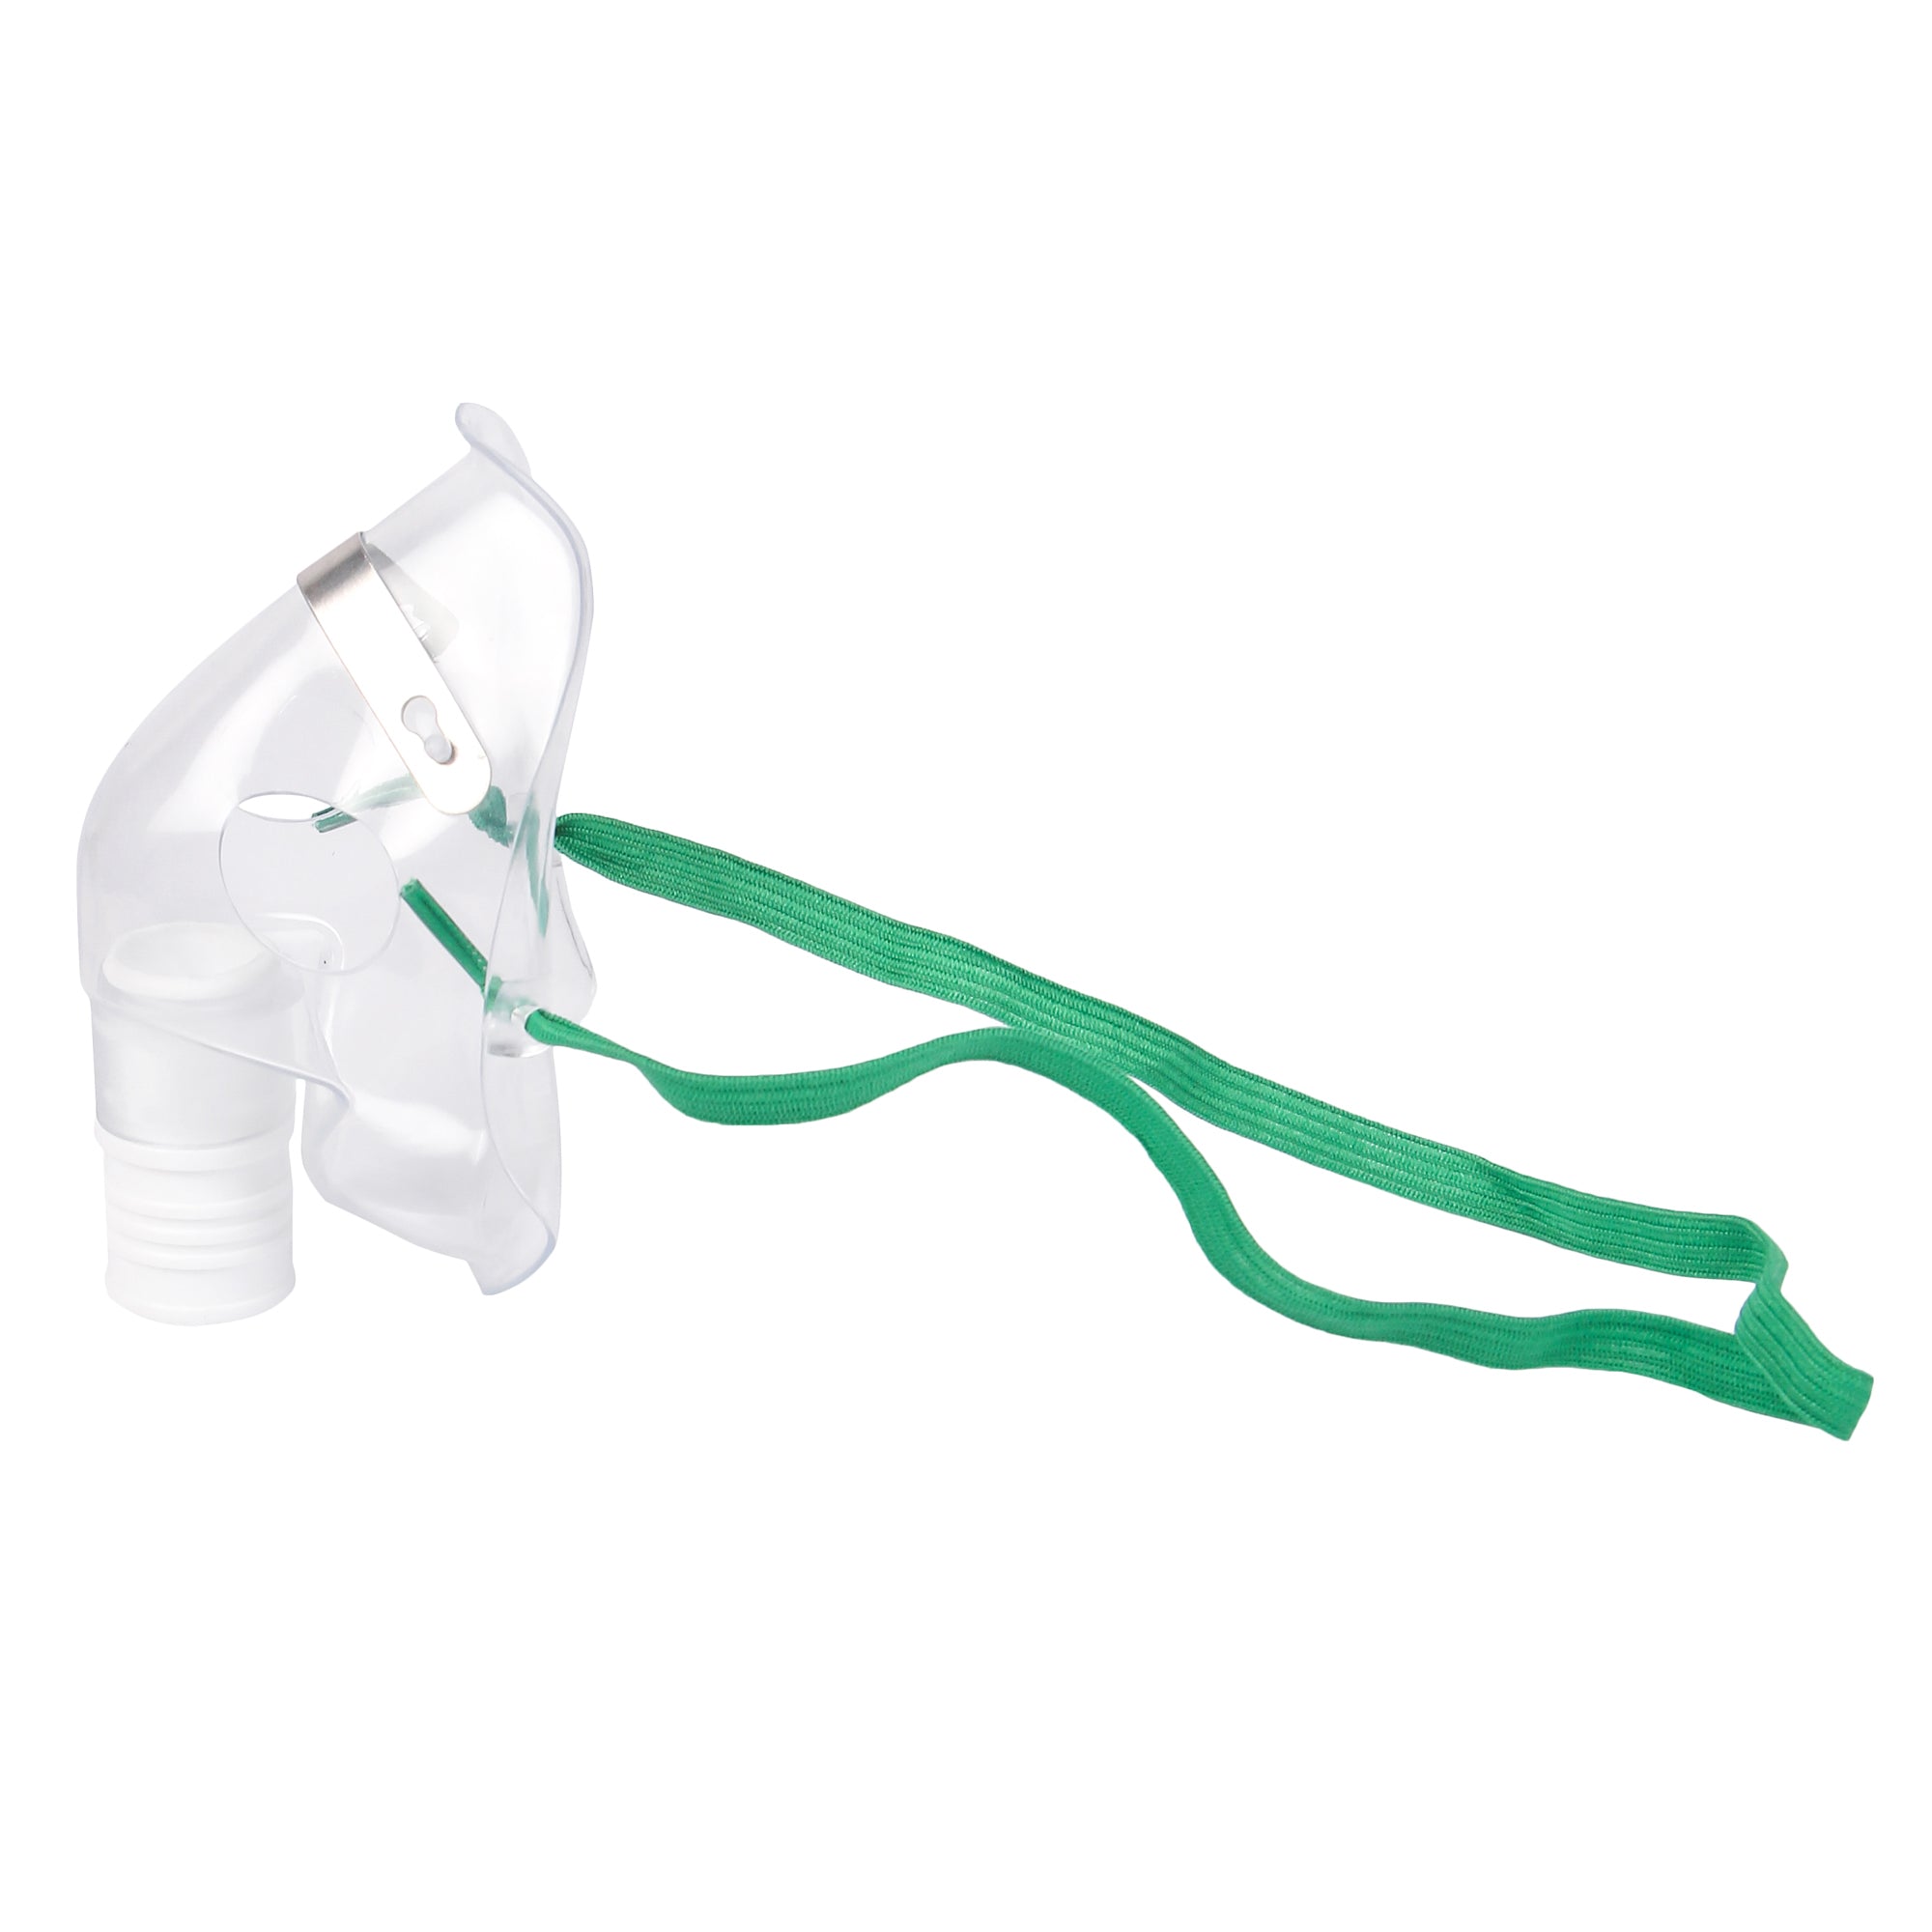 Control D Pediatric Child Mask Kit with Air Tube,Medicine Chamber Nebulizer